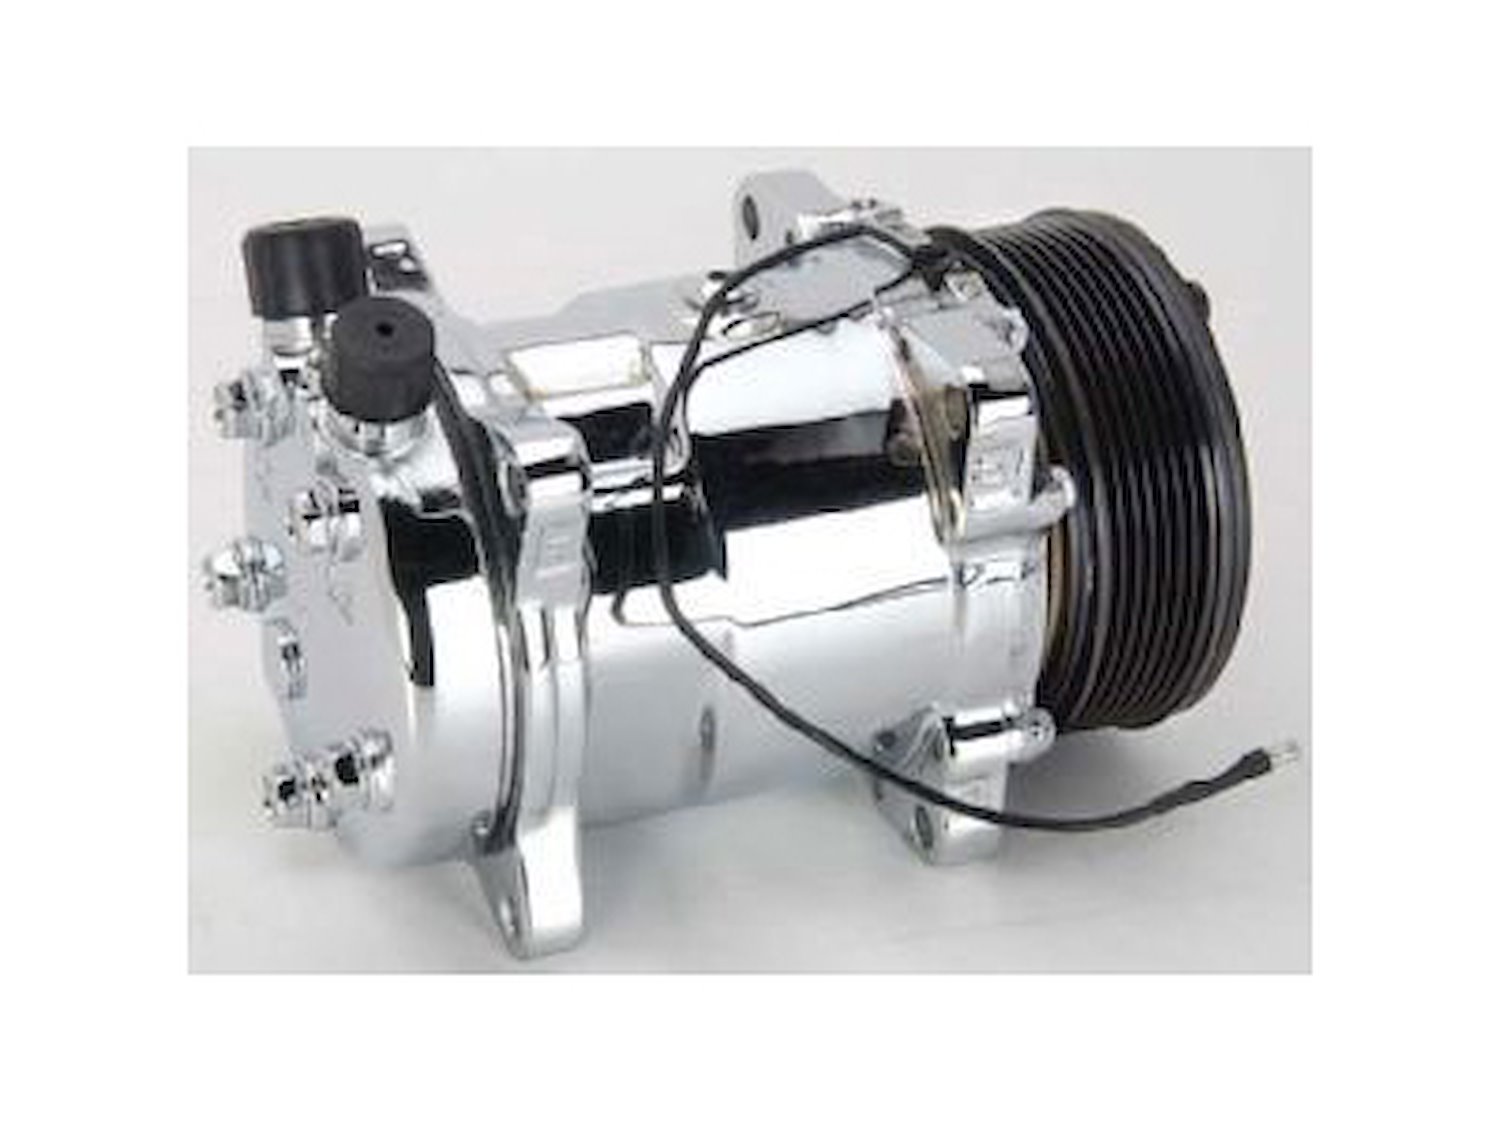 SD508 Air Conditioner Compressor w/7-Groove Serpentine Pulley [Chrome Finish]